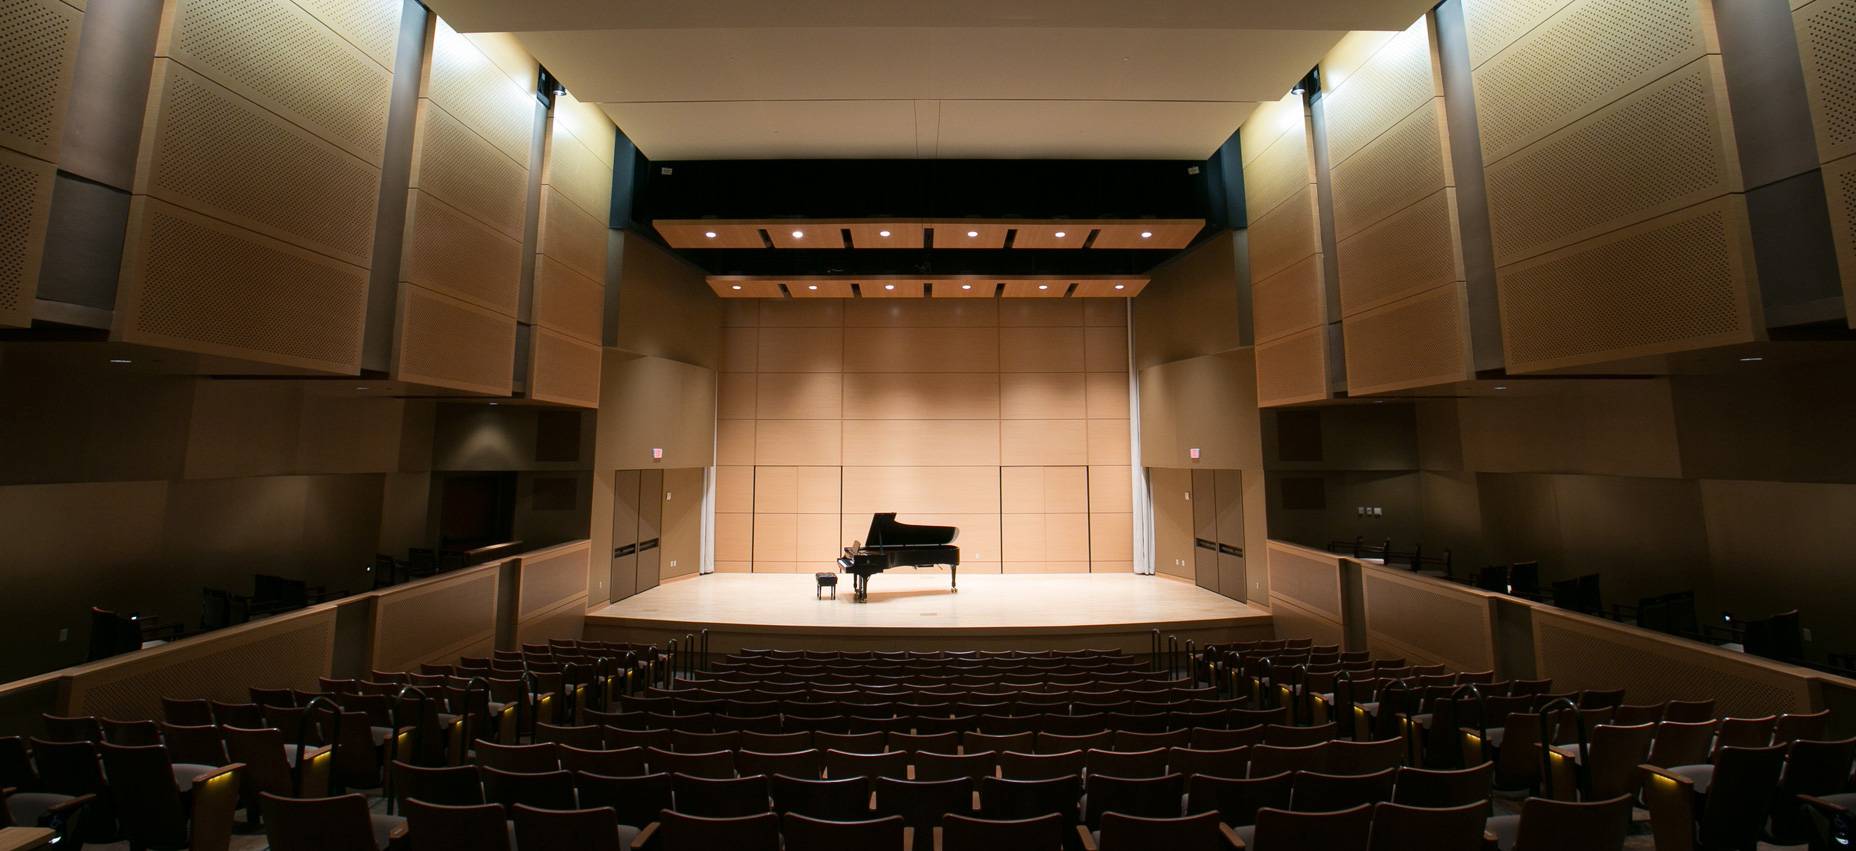 a recital hall with a grand piano in the middle of the picture